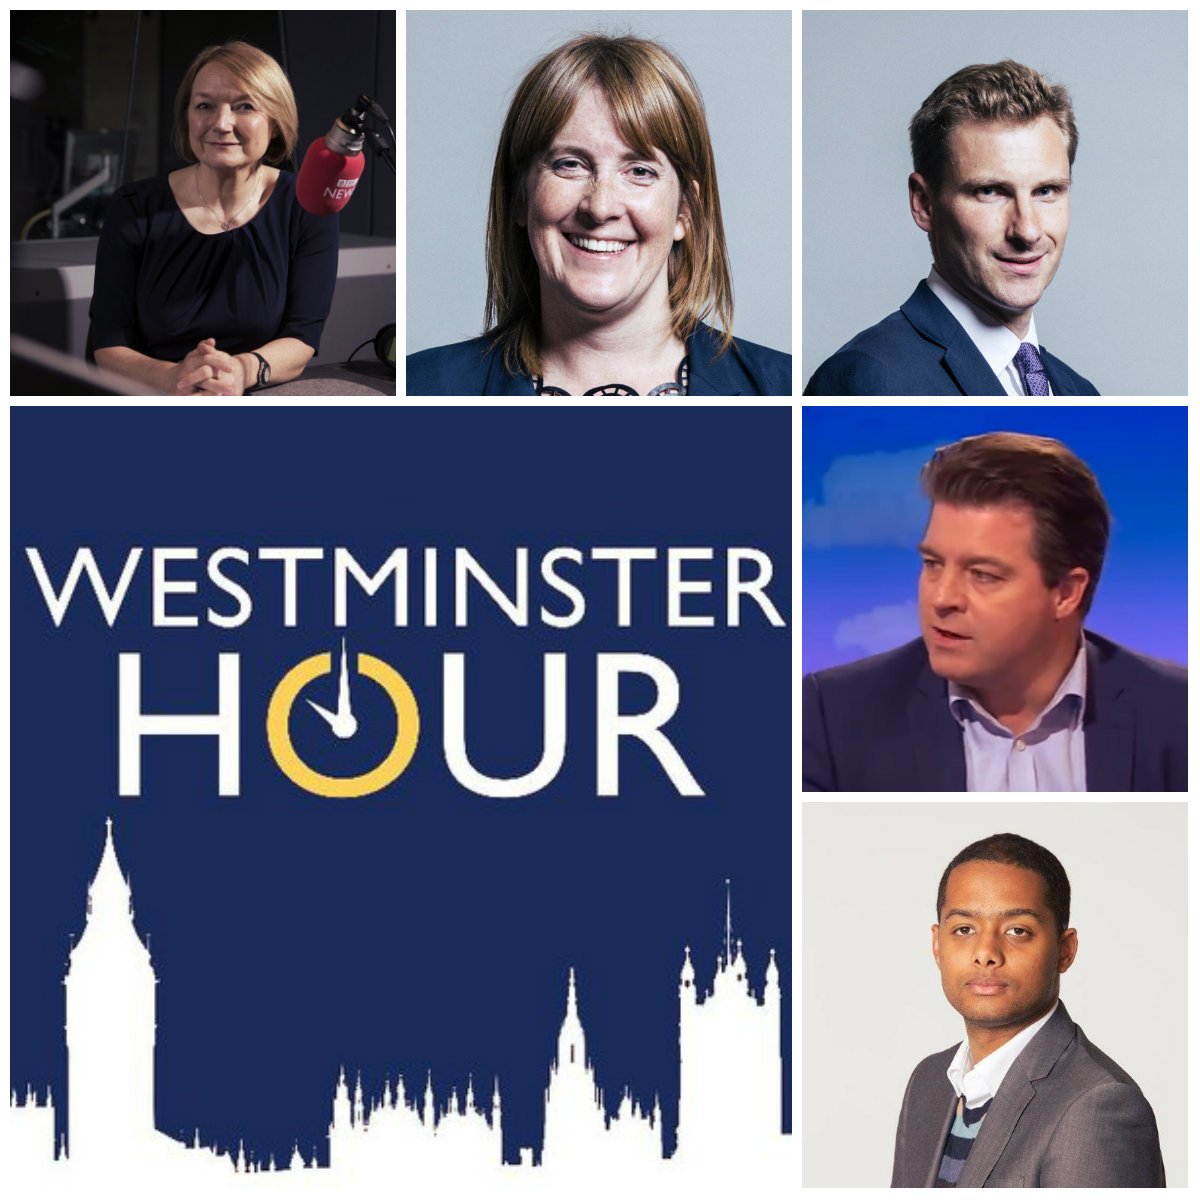 Joining @carolynquinncq this Sunday will be Croydon neighbours @LabourSJ and @CPhilpOfficial, along with economist @LiamHalligan and the New Statesman's @stephenkb. We'll be live on 📻@BBCRadio4 and @BBCiPlayerRadio at 10pm. Do tune in!